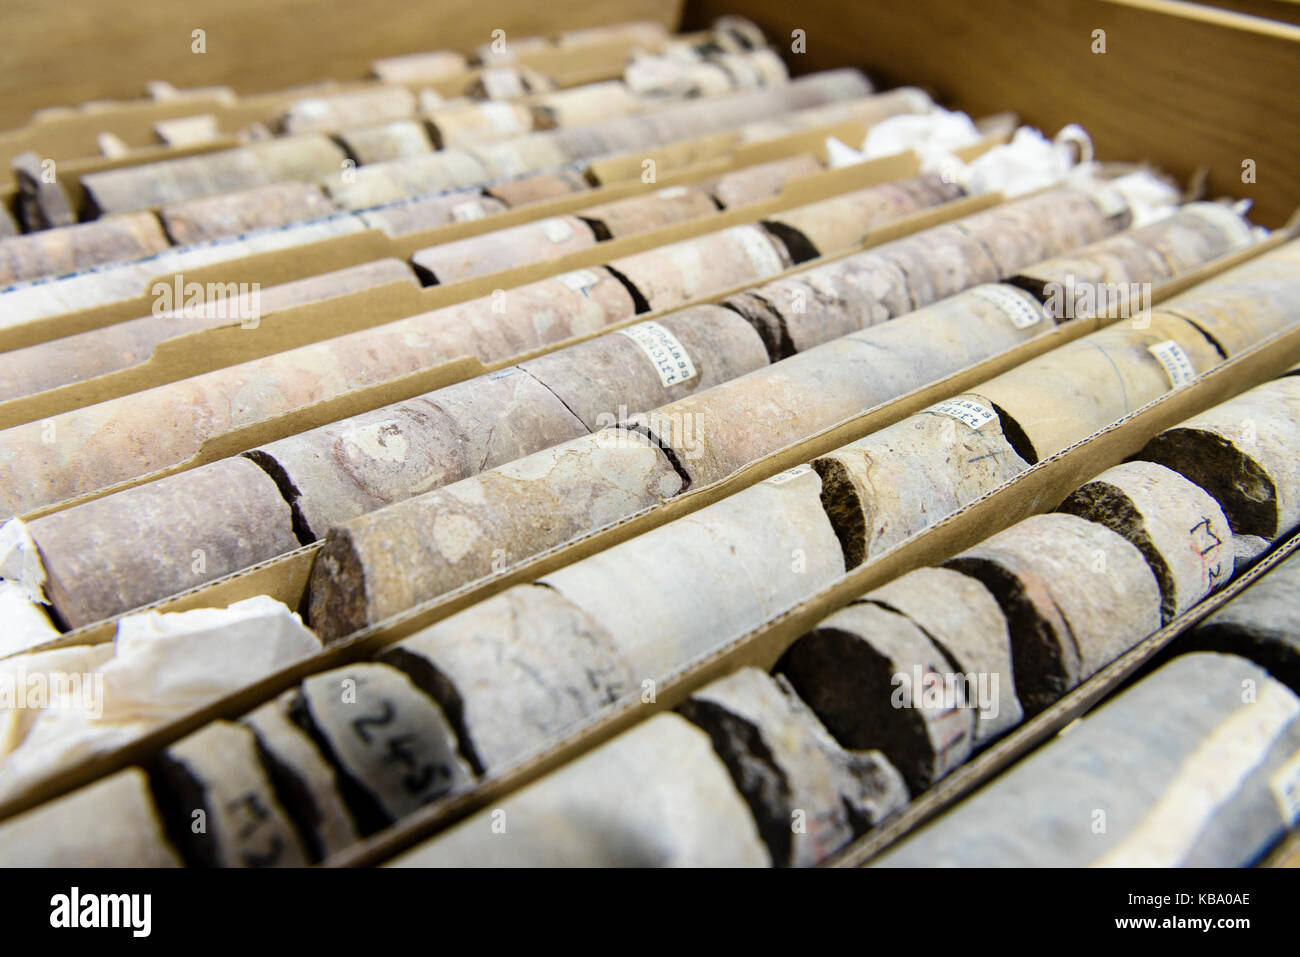 Rock core samples at the Geological Survey of Northern Ireland. Stock Photo